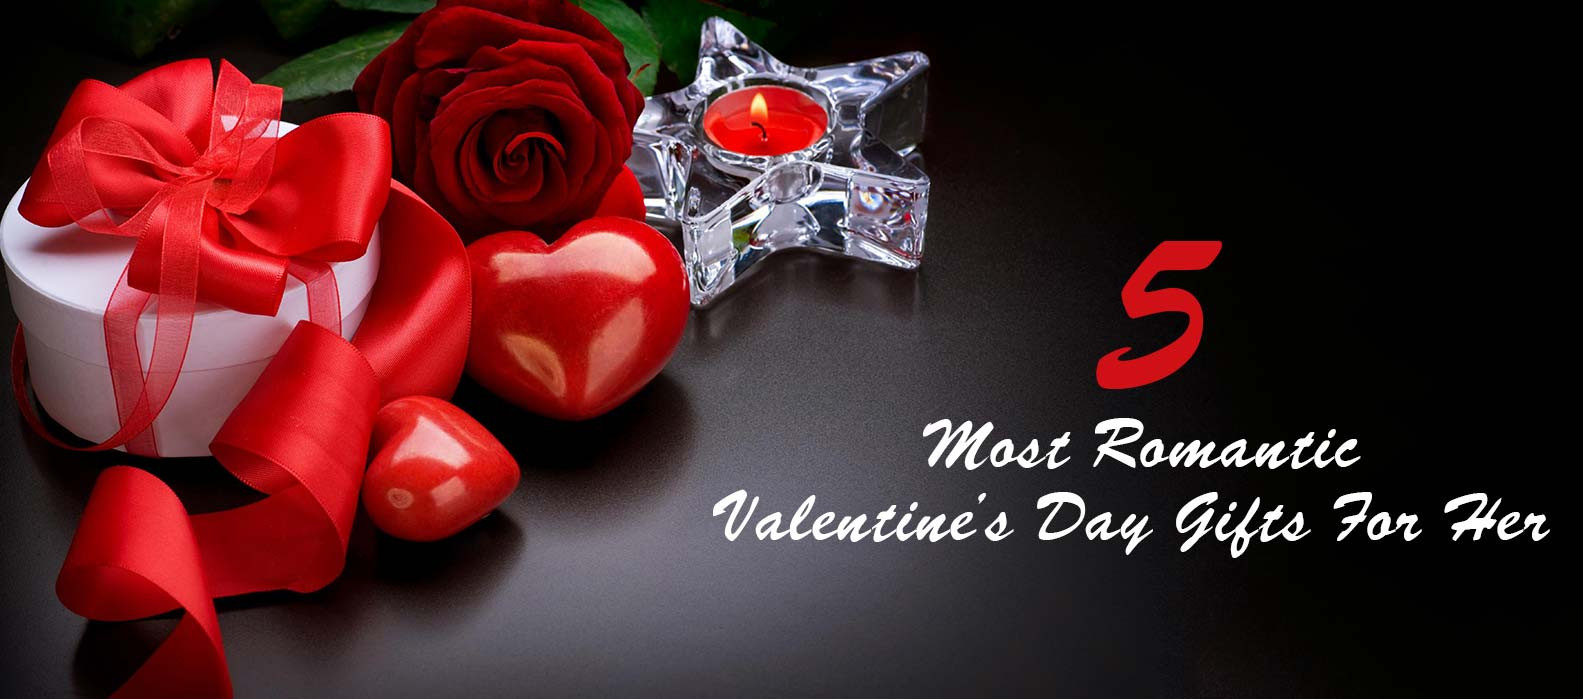 Romantic Valentines Day Gifts For Her
 5 Most Romantic Valentine s Day Gifts For Her Tajonline